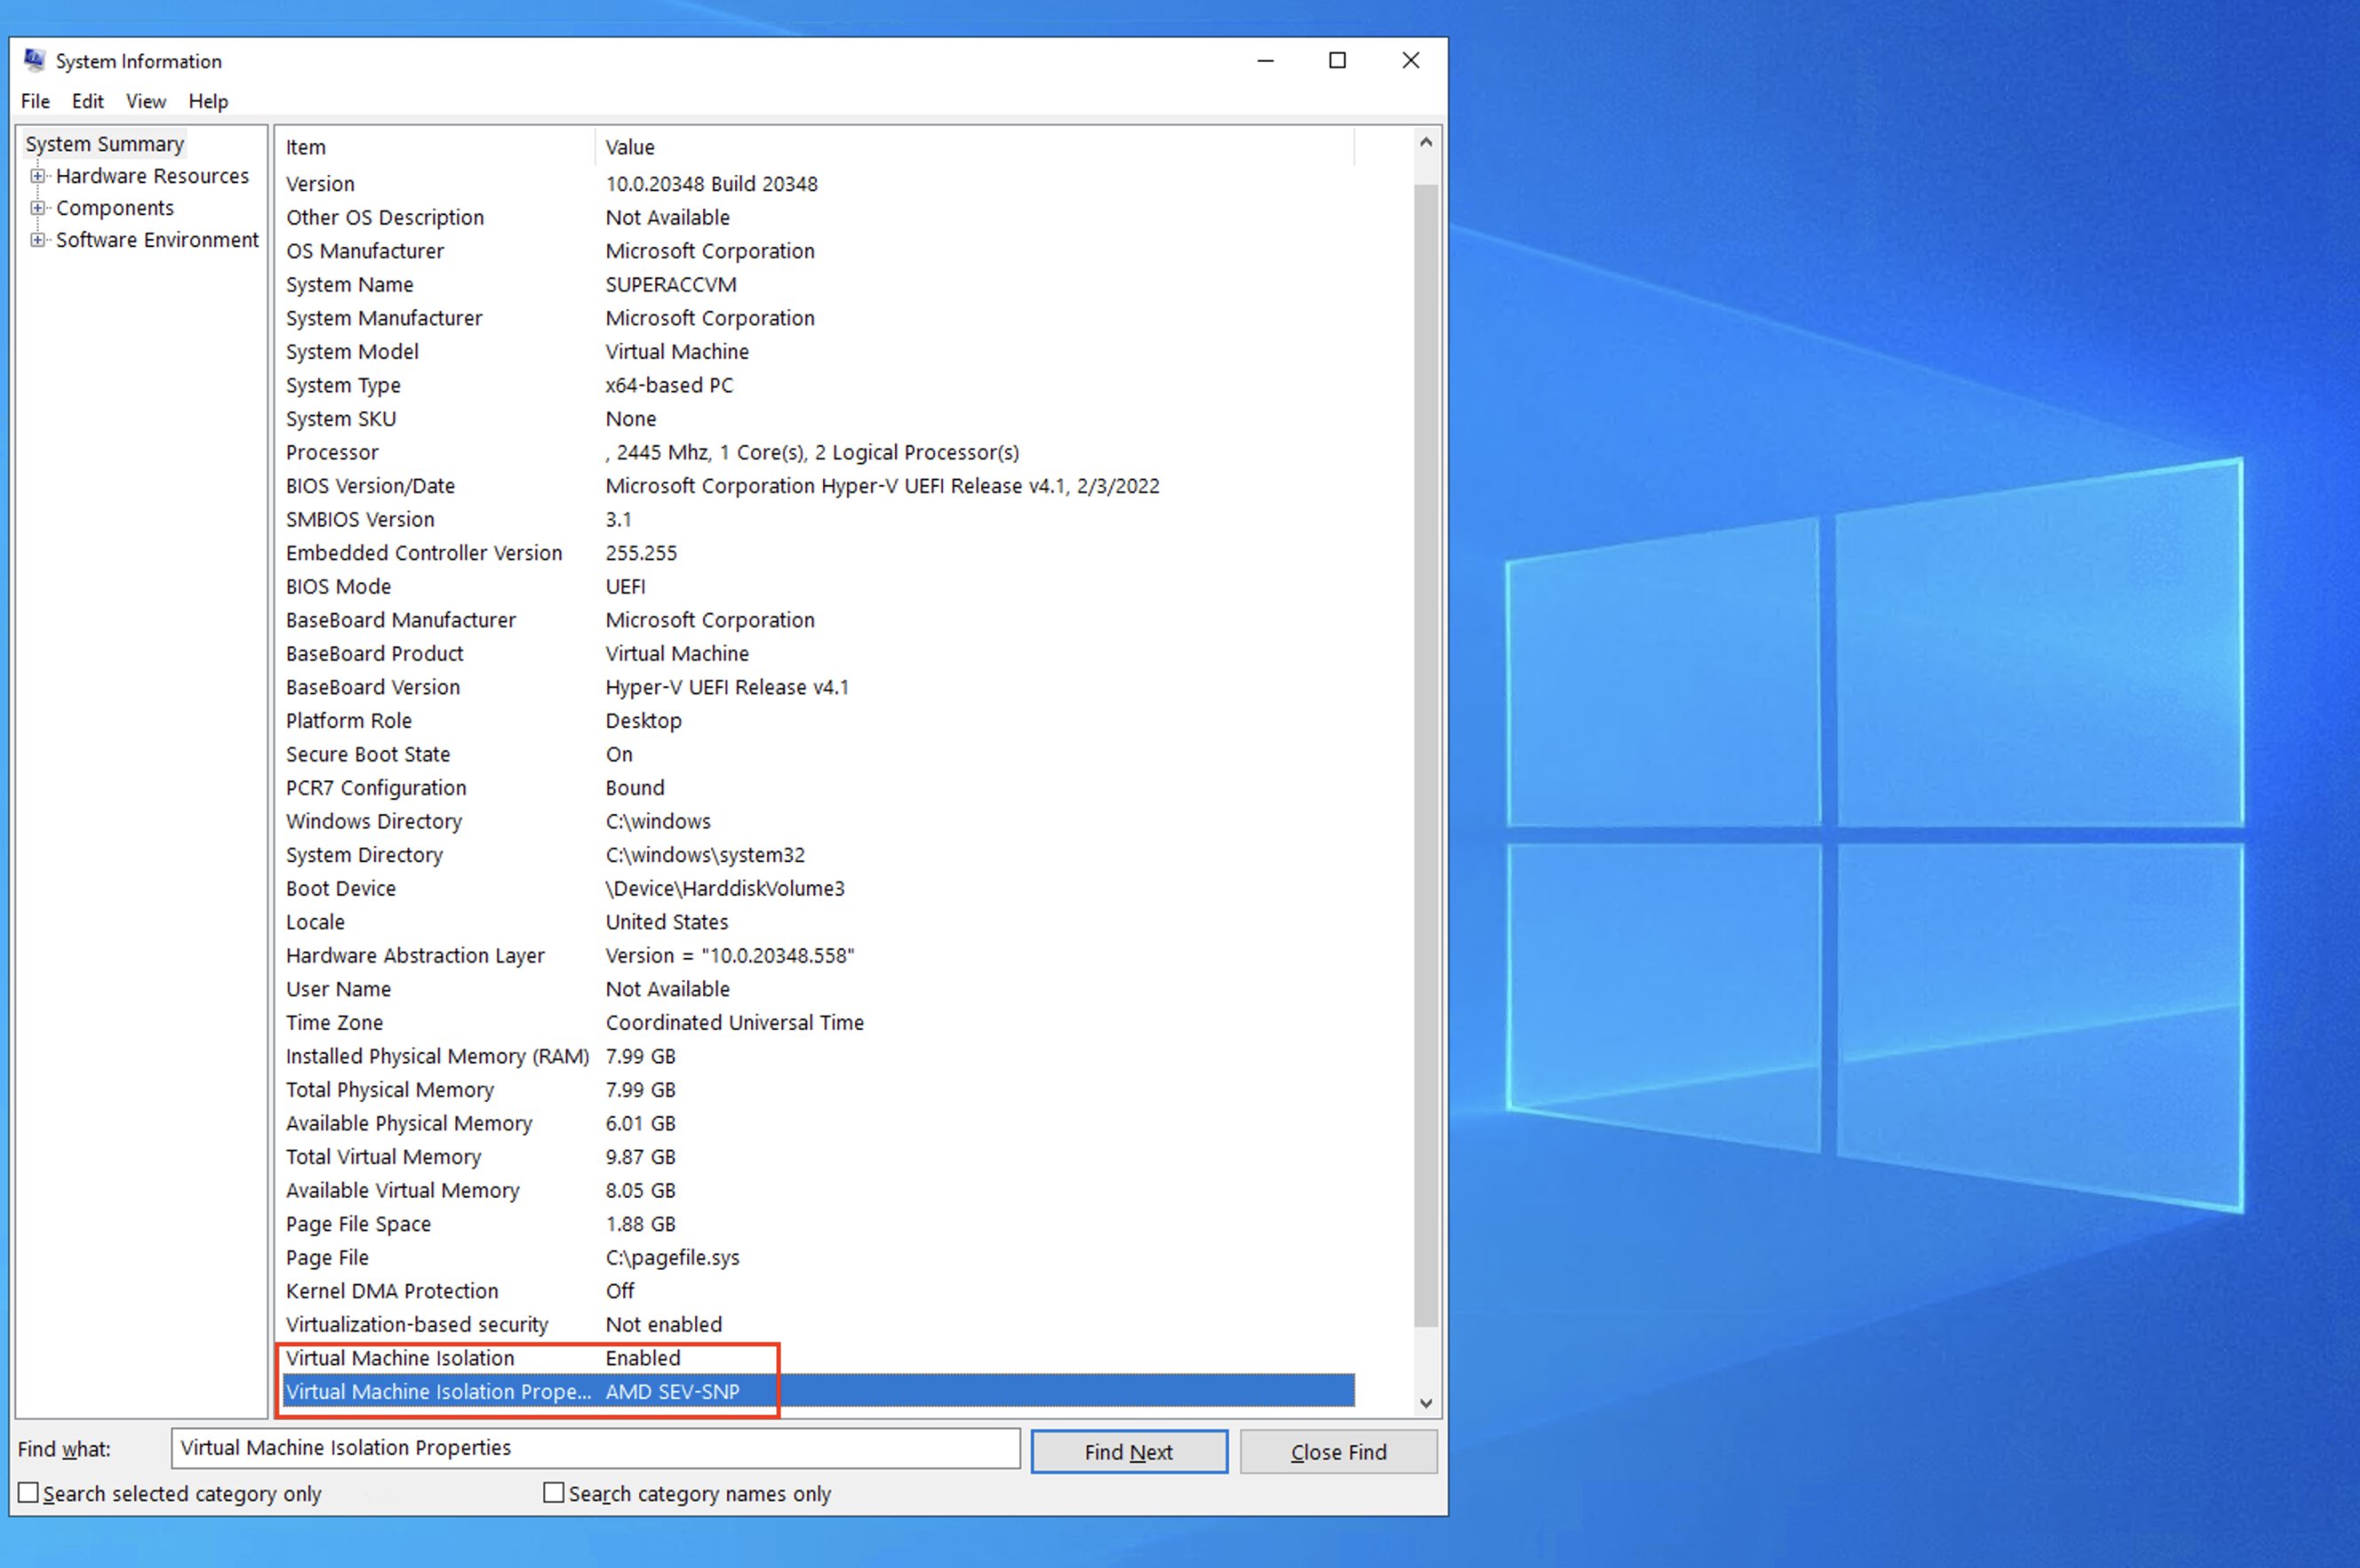 A screenshot of &lsquo;msinfo32&rsquo;, a.k.a. system information. The &ldquo;Virtual Machine Isolation properties&rdquo; key has a value set to &lsquo;AMD SEV-SNP&rsquo;. Virtual machine isolation is set to &rsquo;enabled&rsquo;.